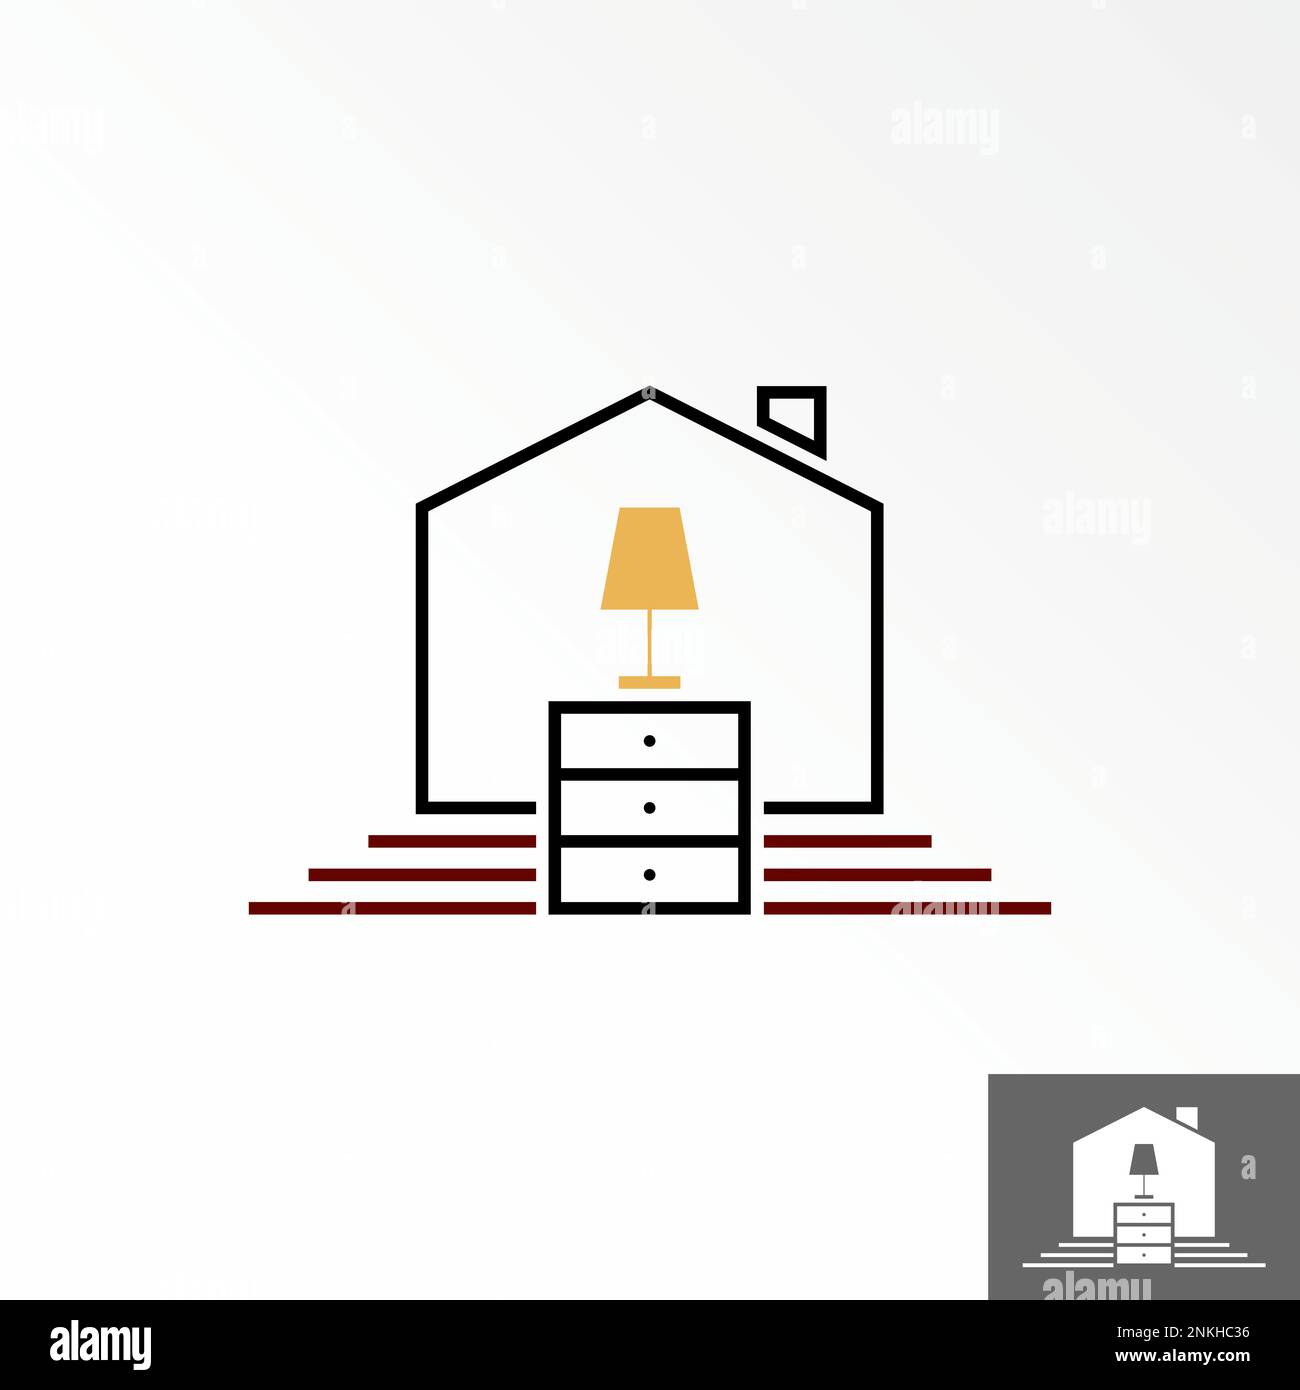 Simple roof house or home with window, table or sideboard, ladder, and lamp graphic icon logo design abstract concept vector stock property interior Stock Vector